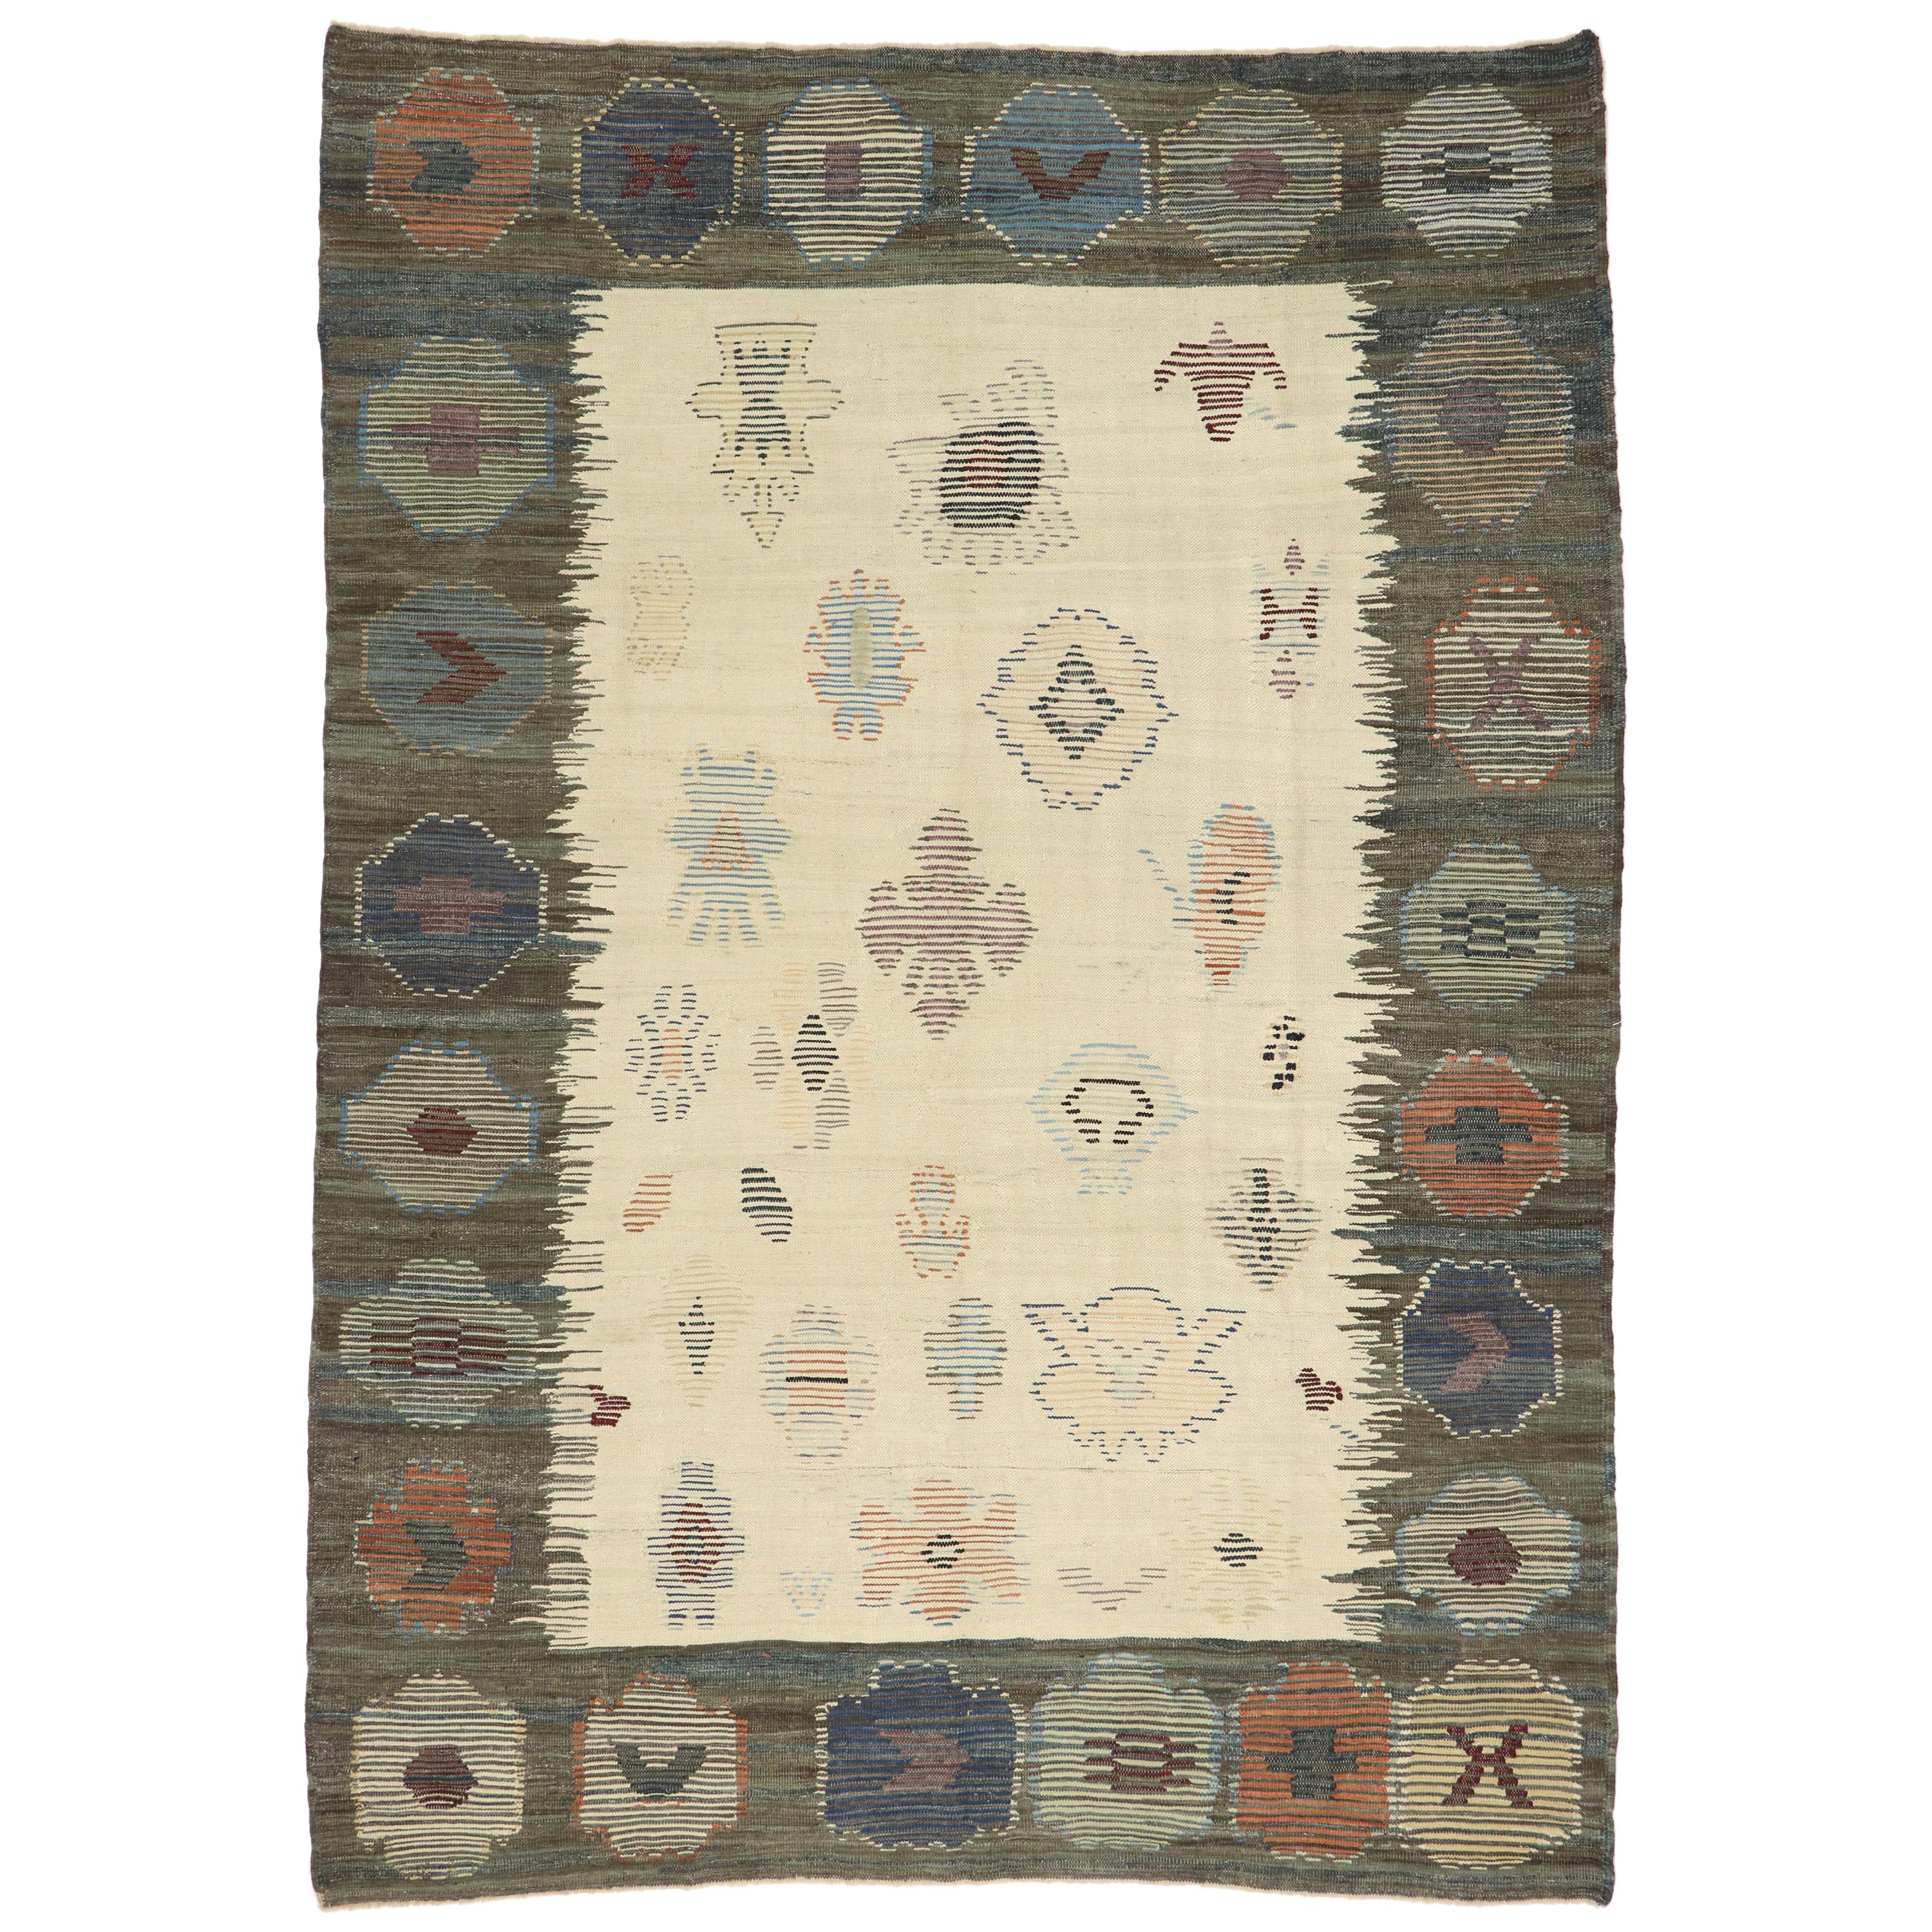 New Contemporary Turkish Kilim Souf Rug with Tribal Style, Flat-Weave Souf Rug